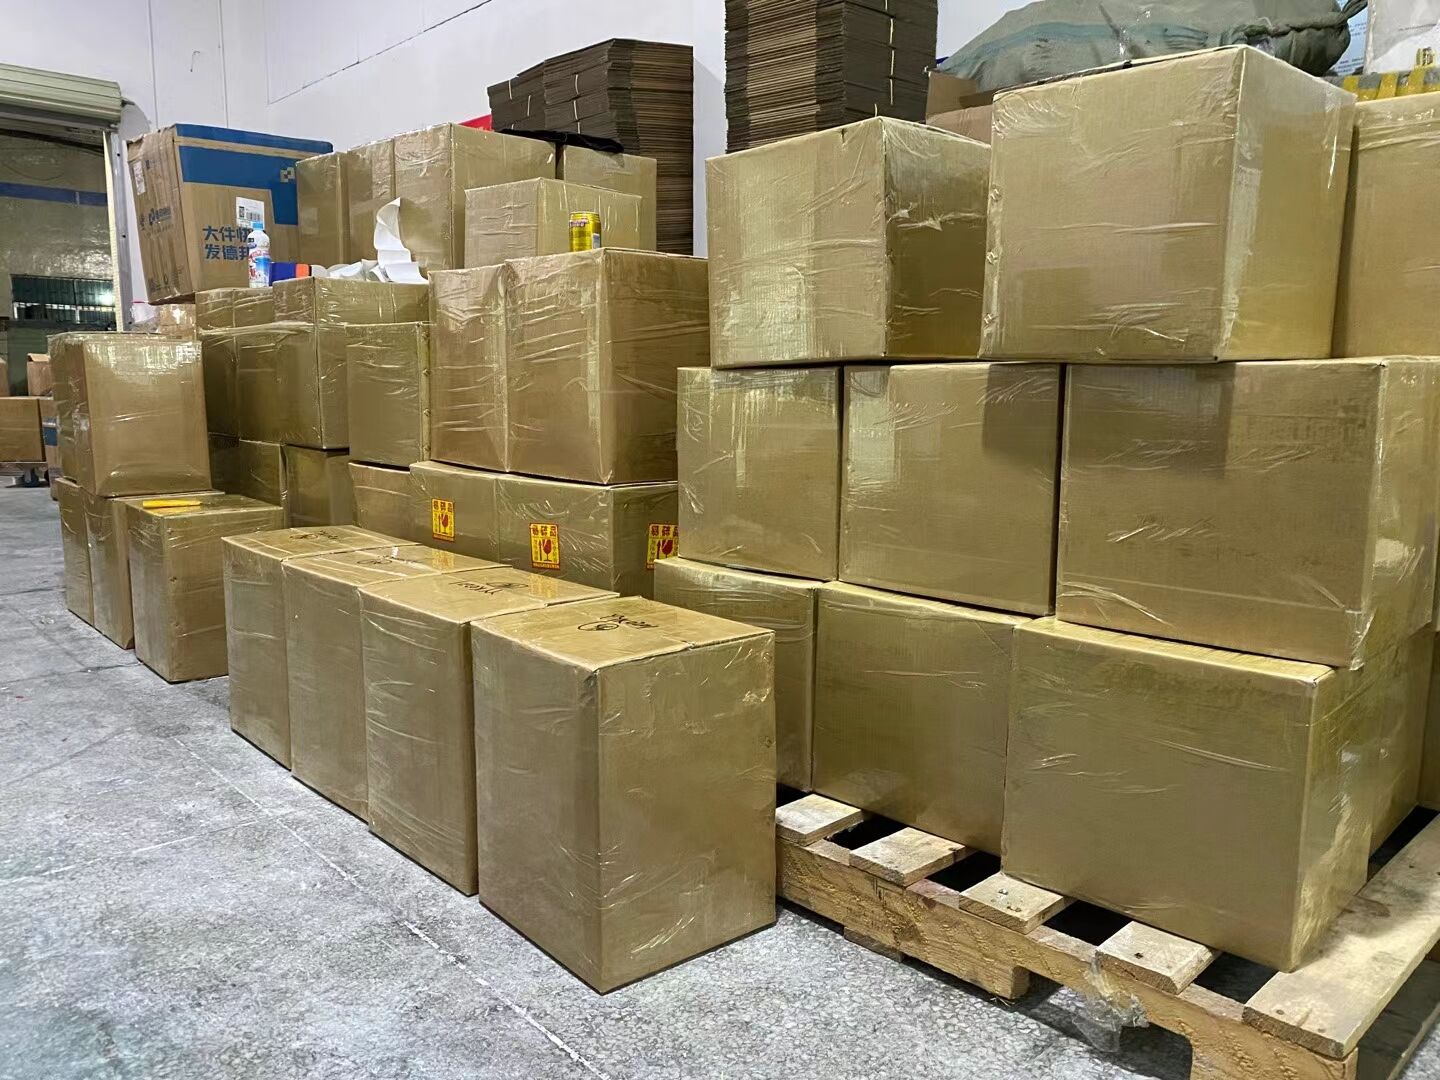 On May 8, 2021, Spanish customers phenacetin powder will be officially sent, which is expected to arrive in the middle of May